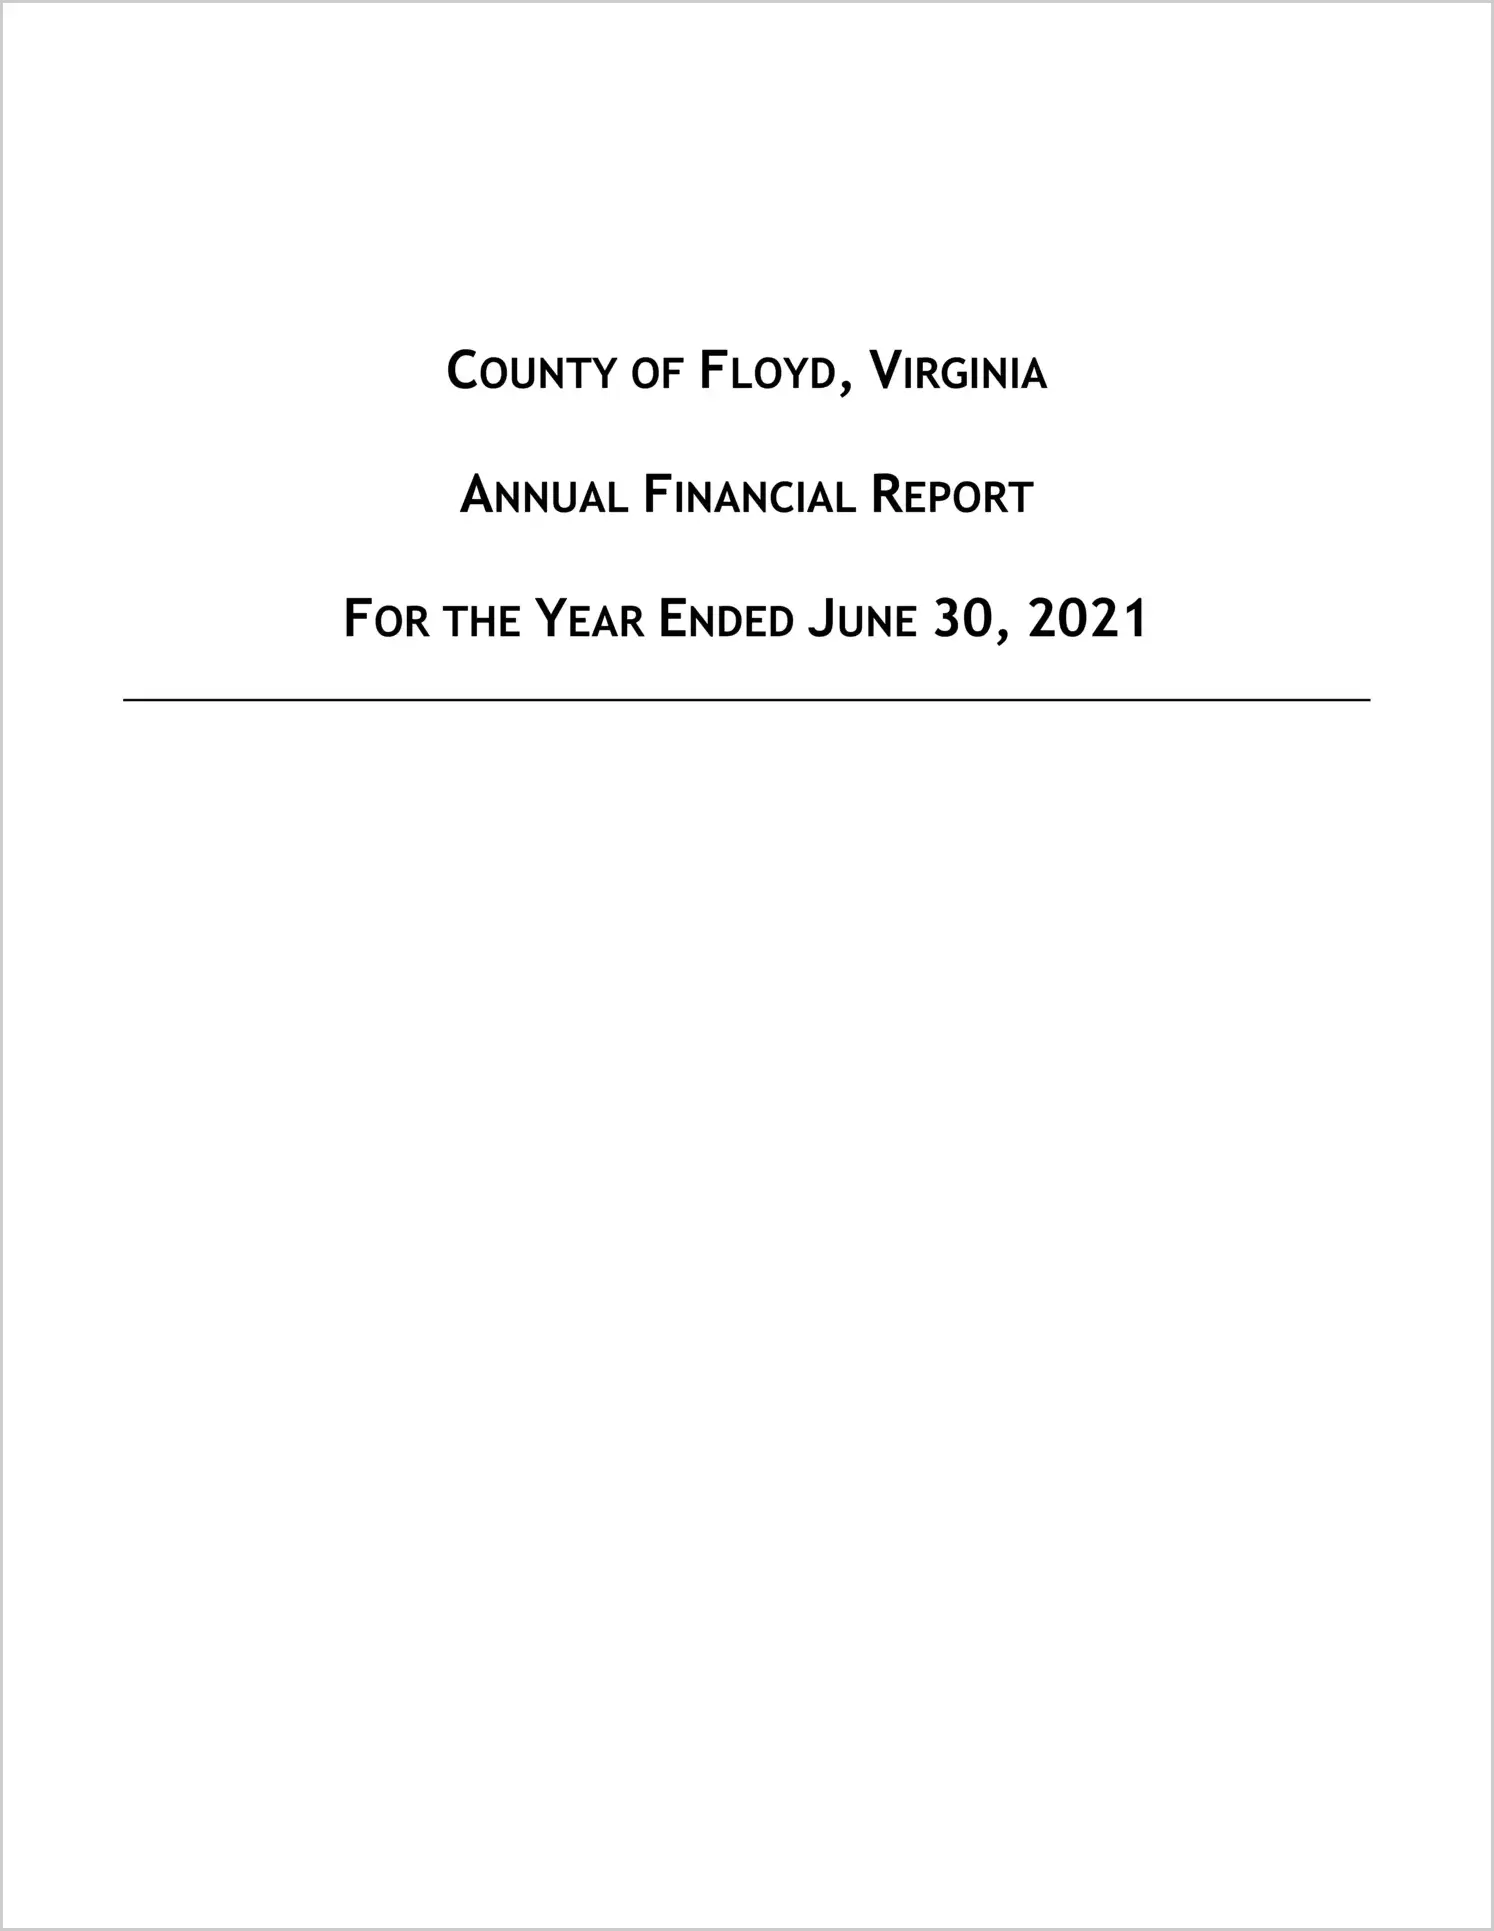 2021 Annual Financial Report for County of Floyd